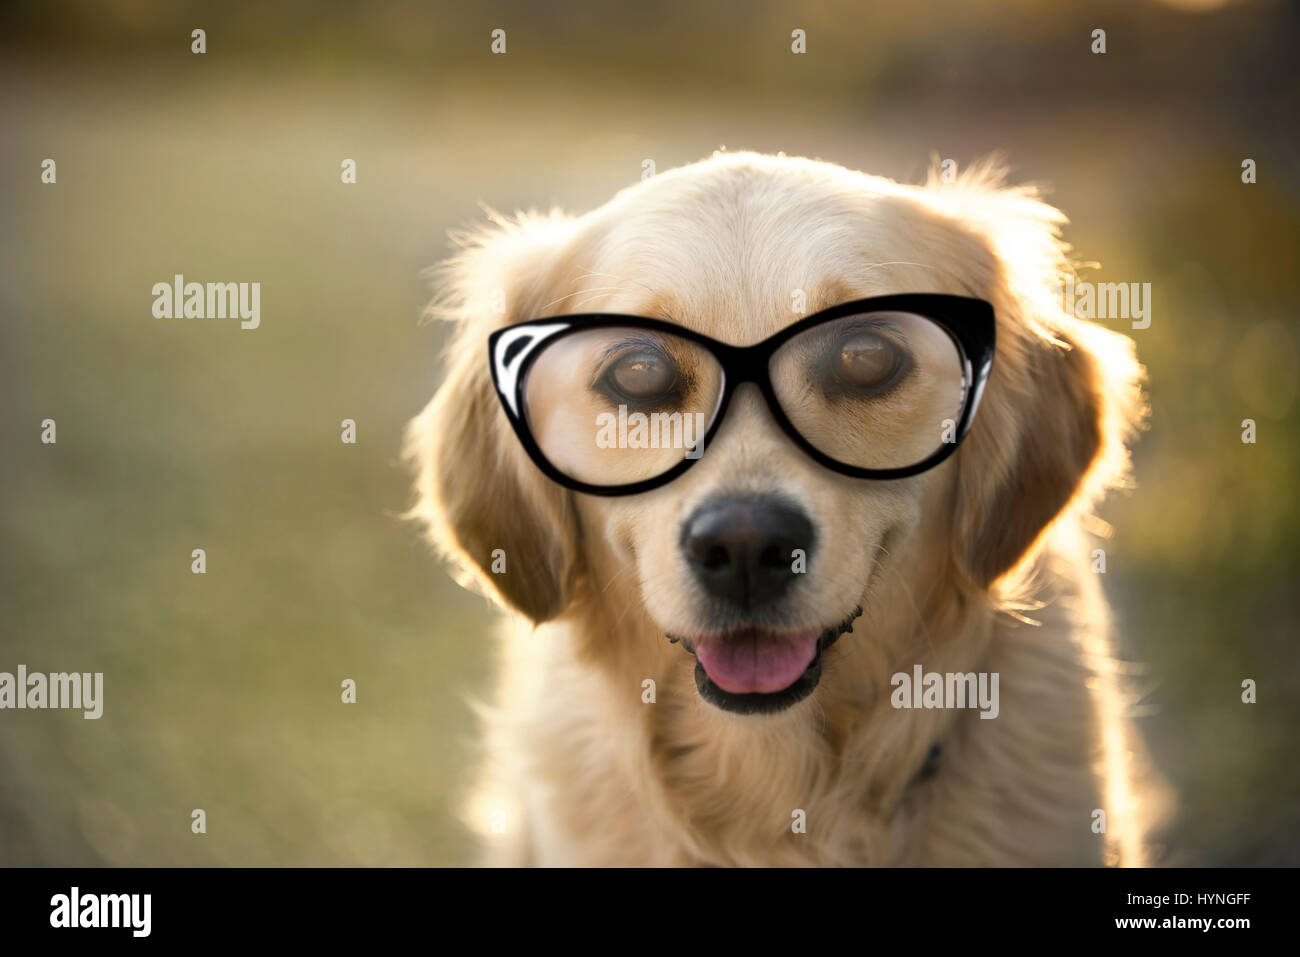 Portrait of a golden retriever dog with eye glasses Stock Photo